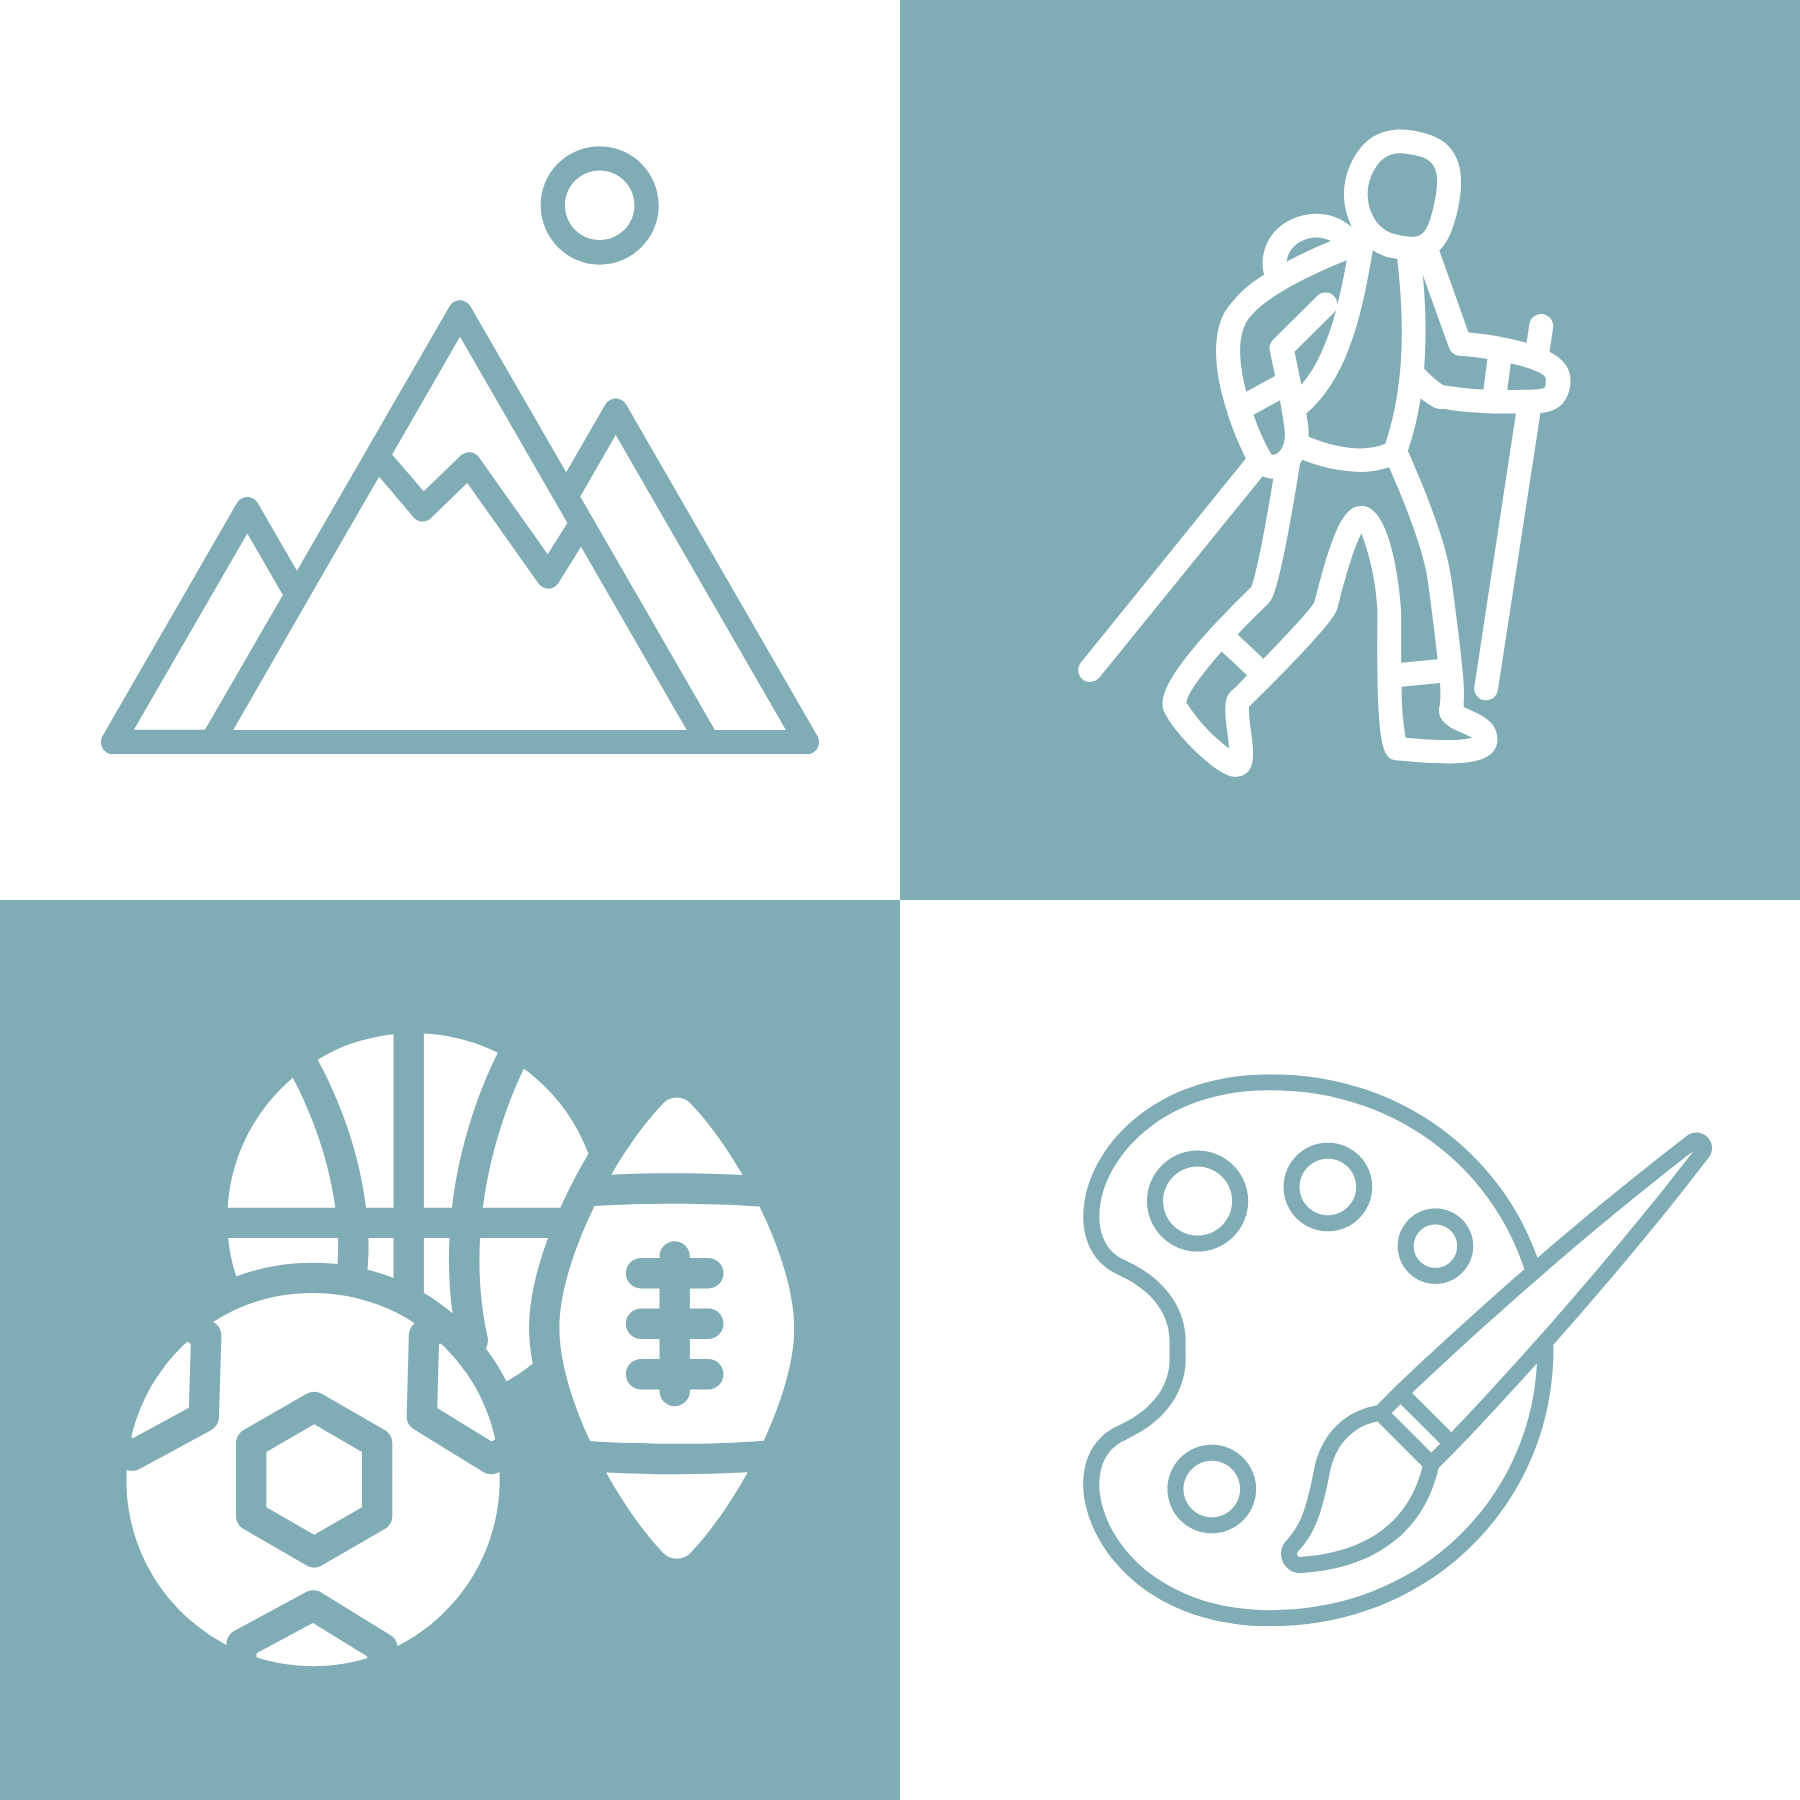 Positive activities icons